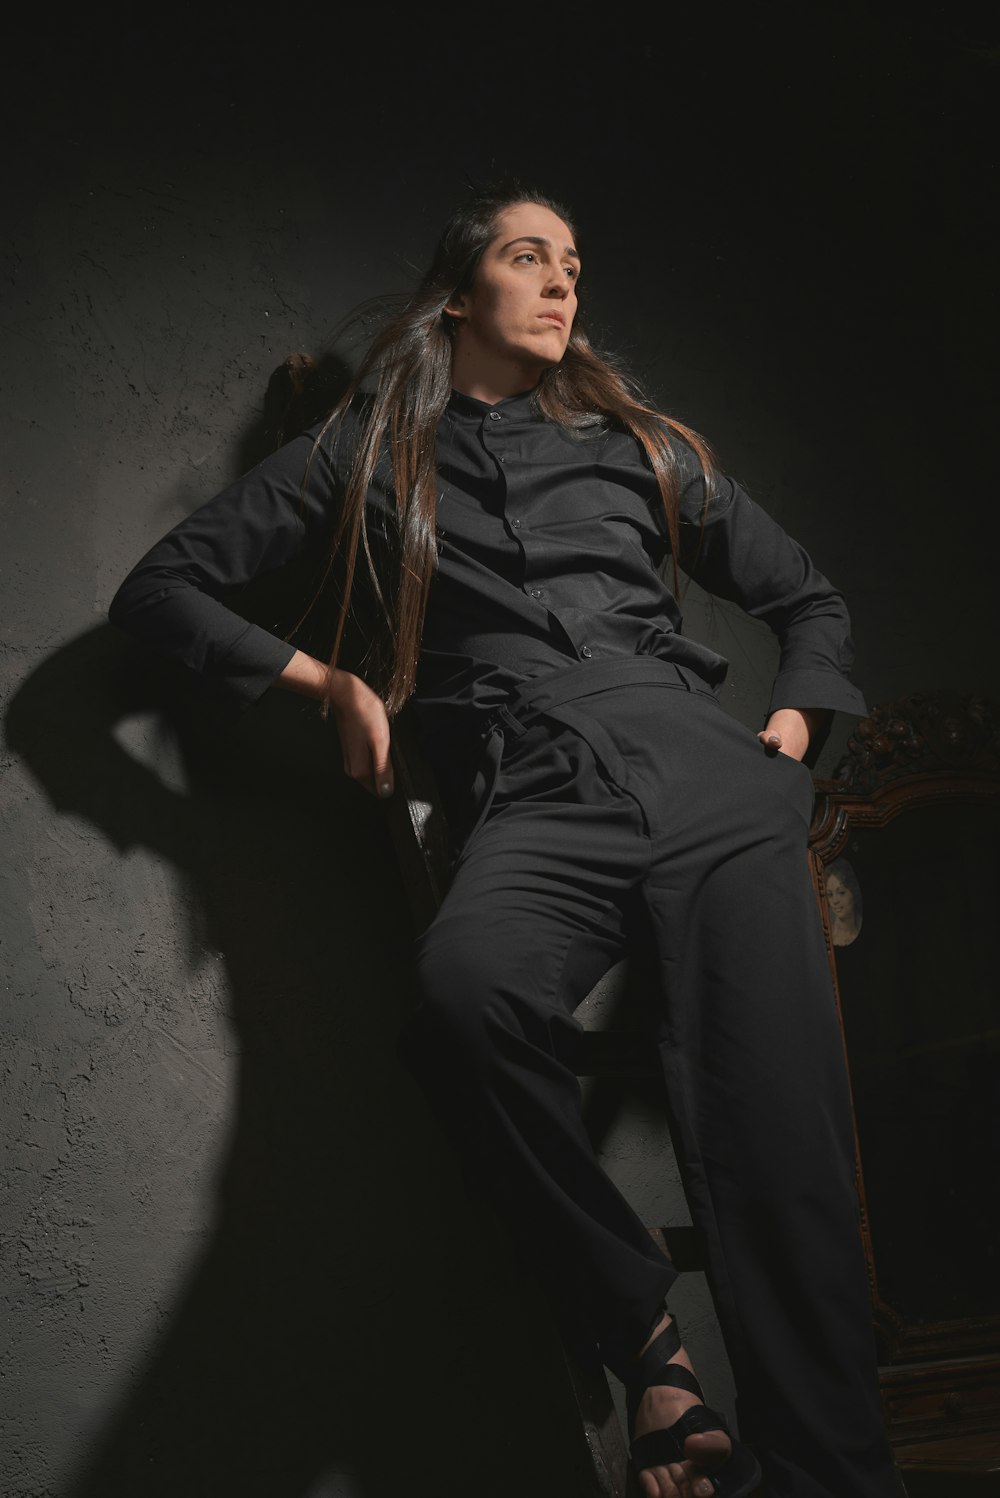 a woman with long hair sitting on a chair